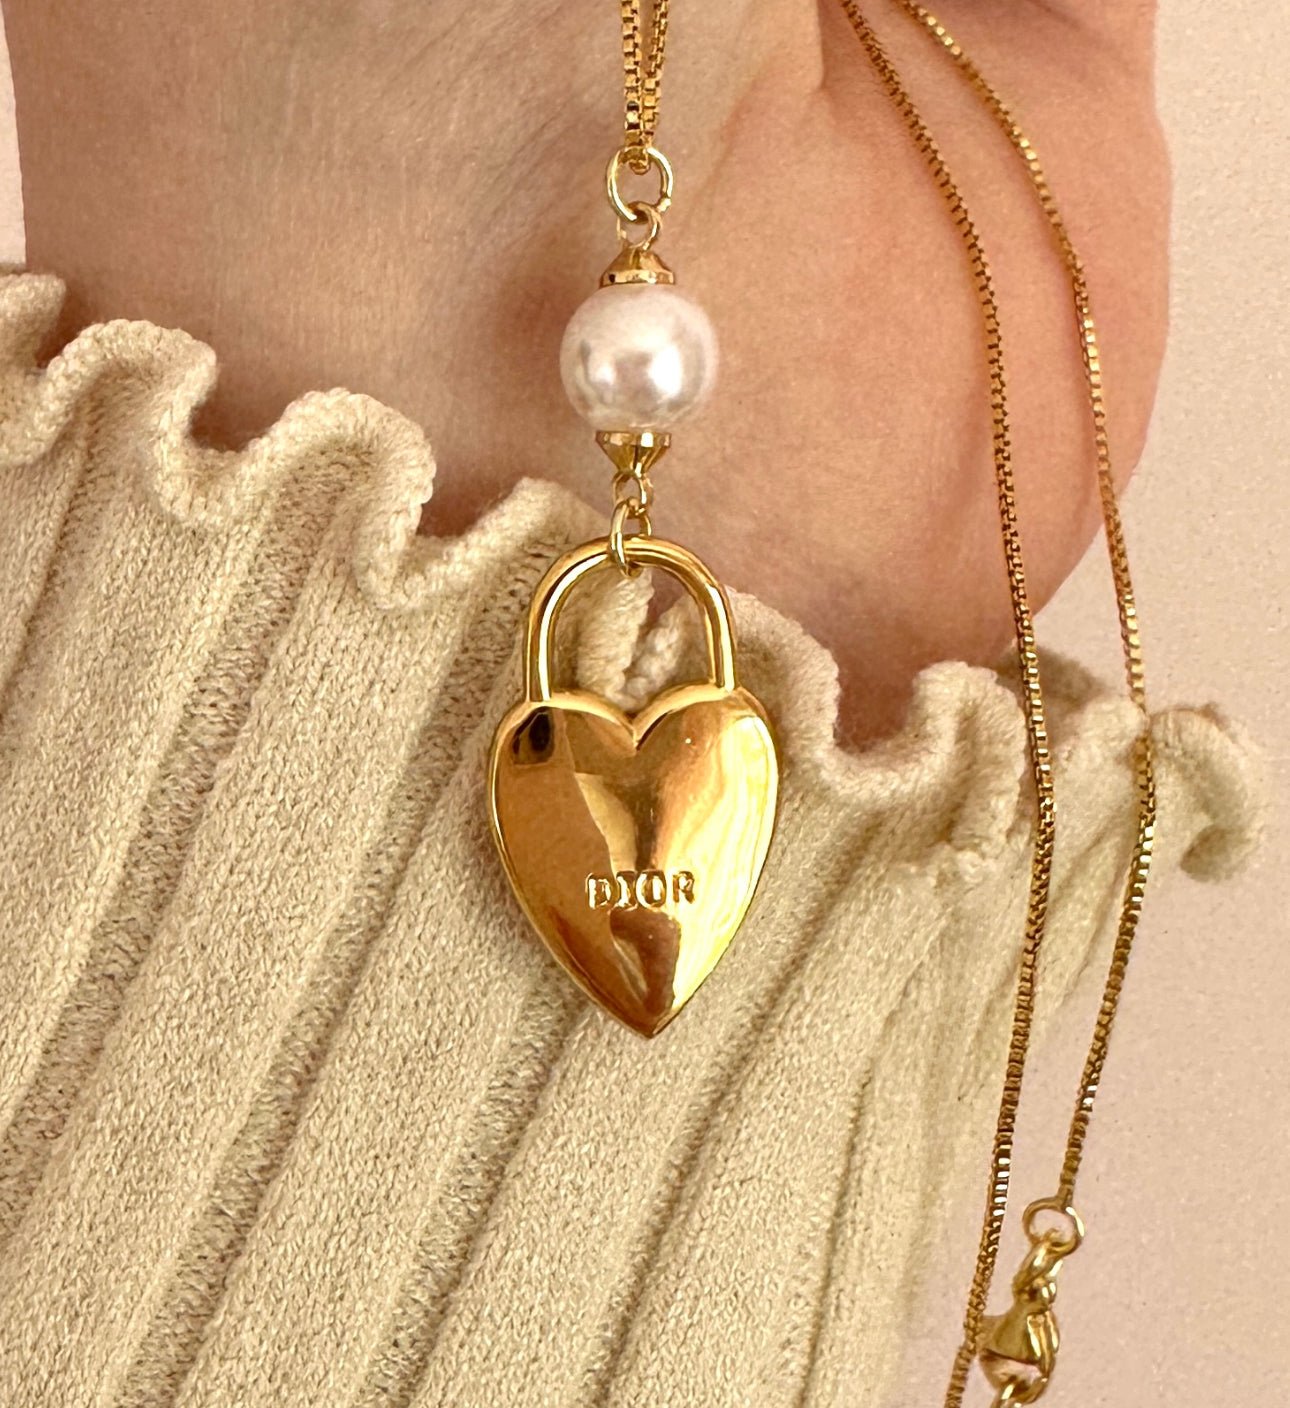 The “J’adore” Heart CD Necklace